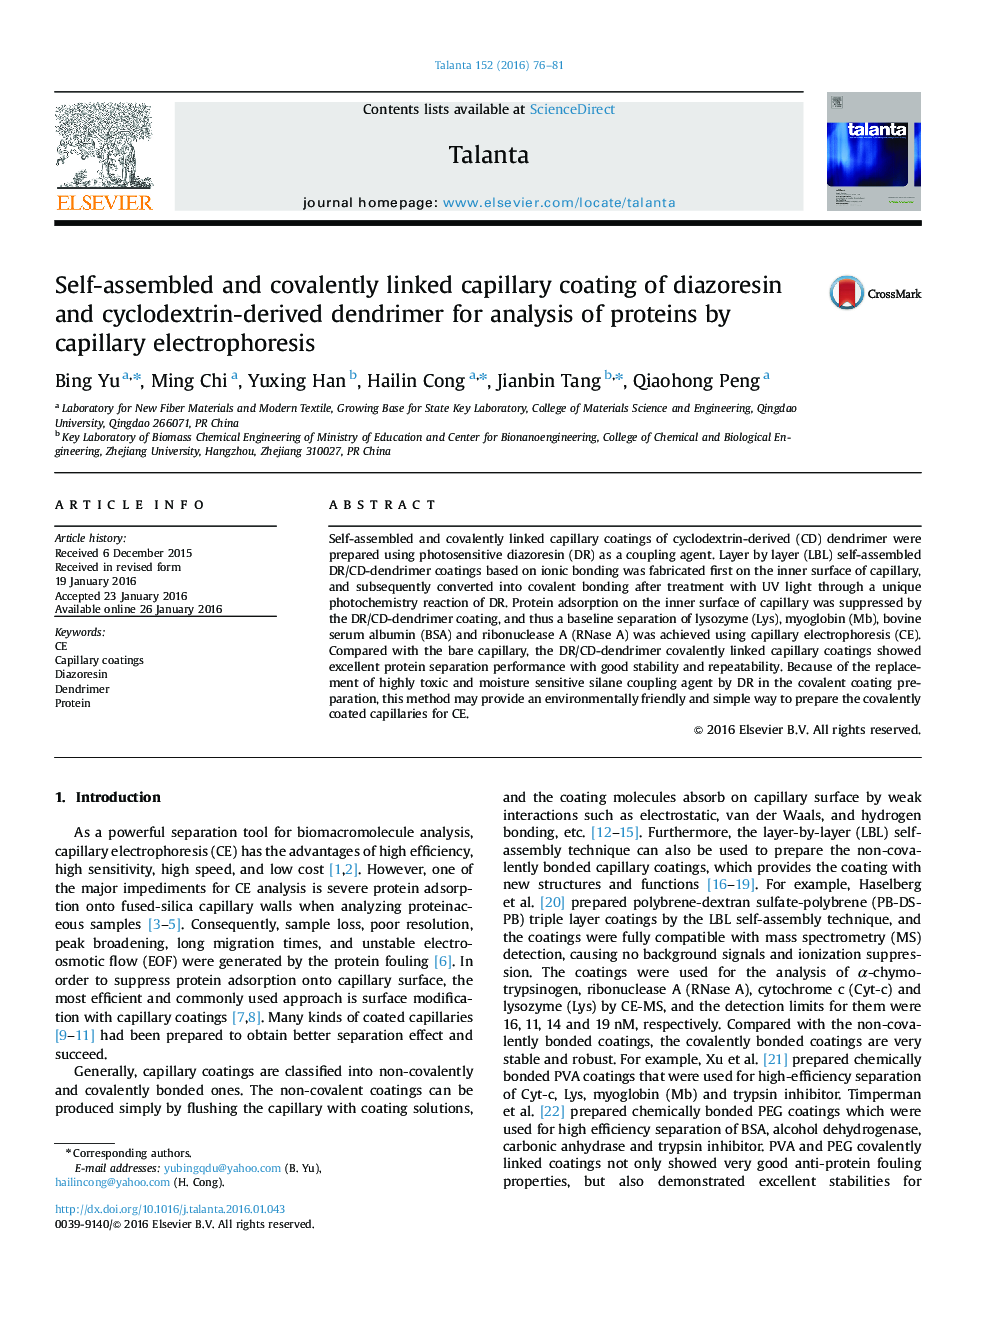 Self-assembled and covalently linked capillary coating of diazoresin and cyclodextrin-derived dendrimer for analysis of proteins by capillary electrophoresis